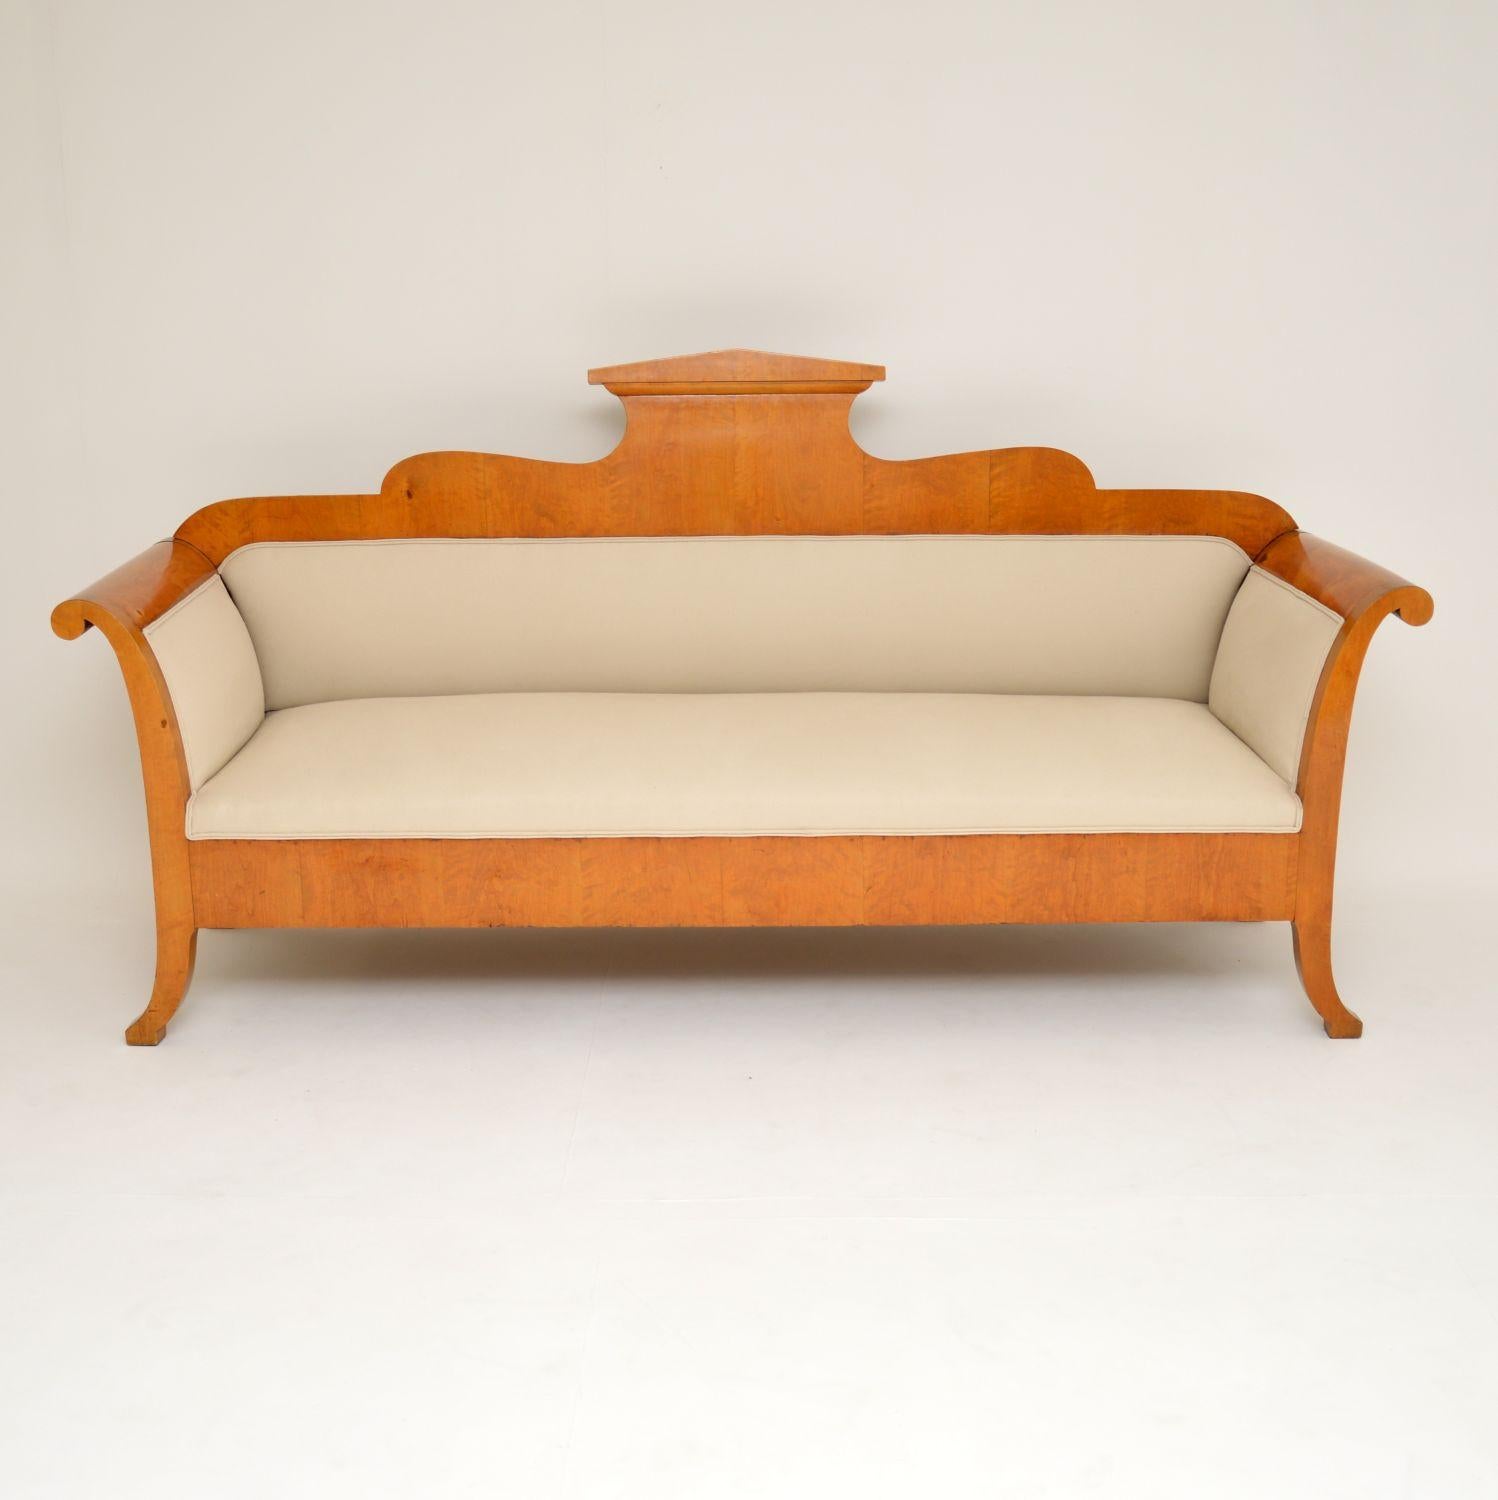 Large impressive antique Satin Birch Biedermeier sofa, which has just been re-upholstered in our regular natural cotton fabric. I would date it to around the 1850’s period & it’s in excellent condition throughout.

This sofa has just come over